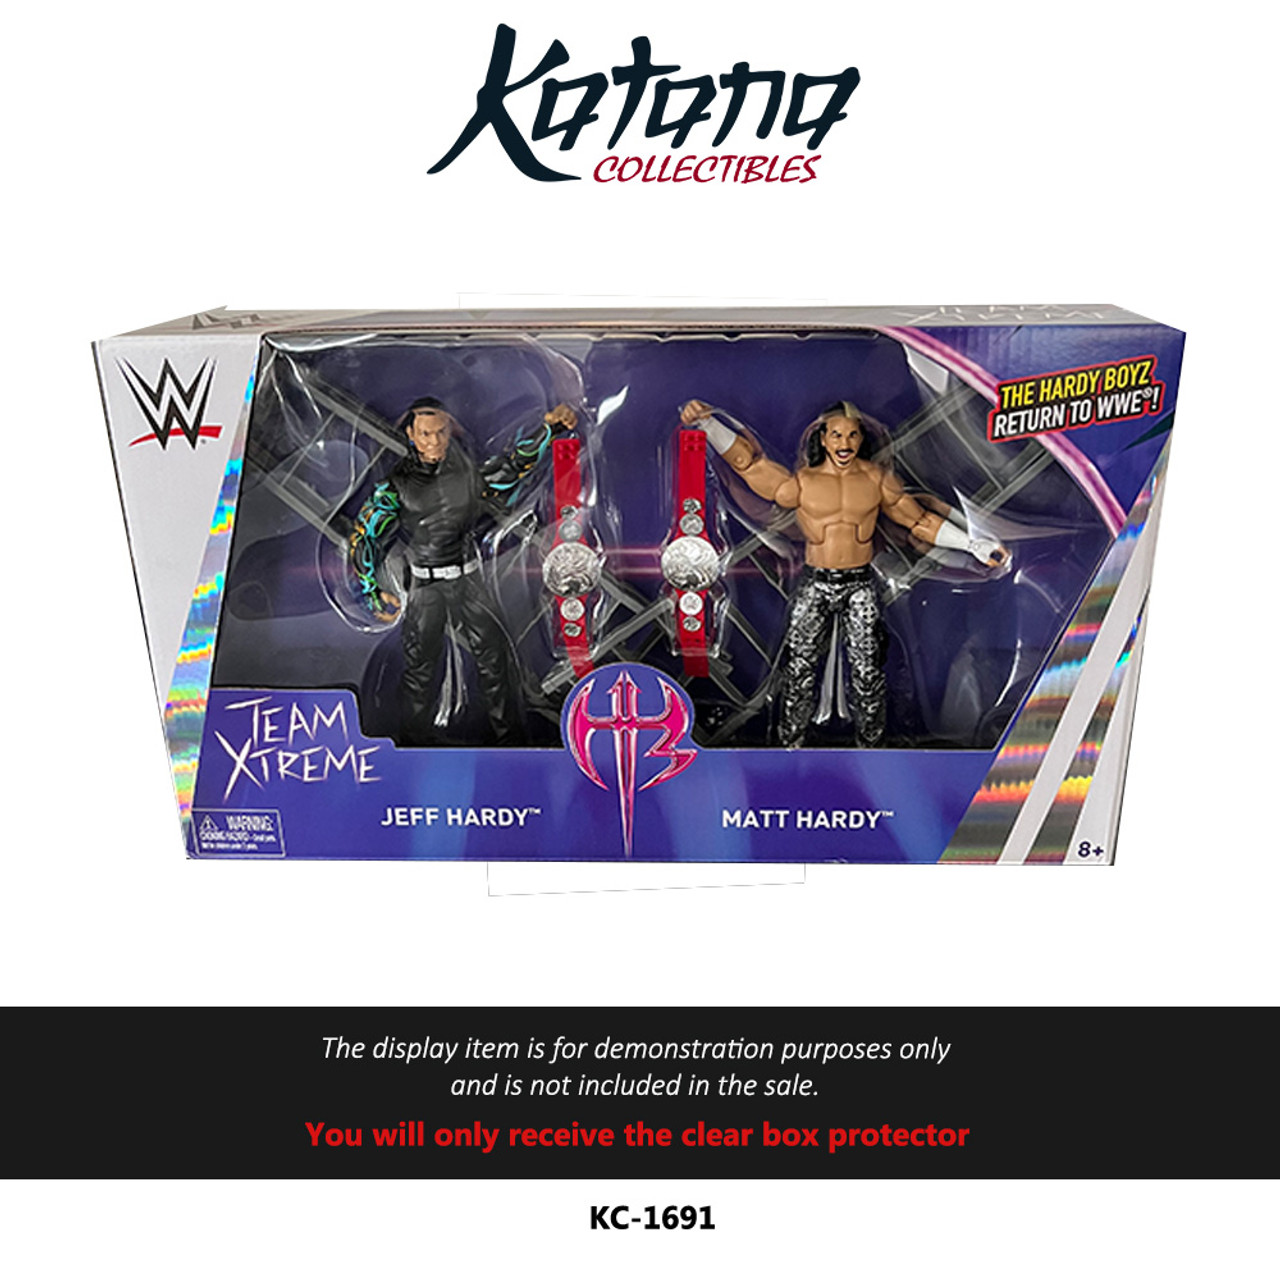 Katana Collectibles Protector For WWE Mattel Epic Moments The Hardy Boyz Figures